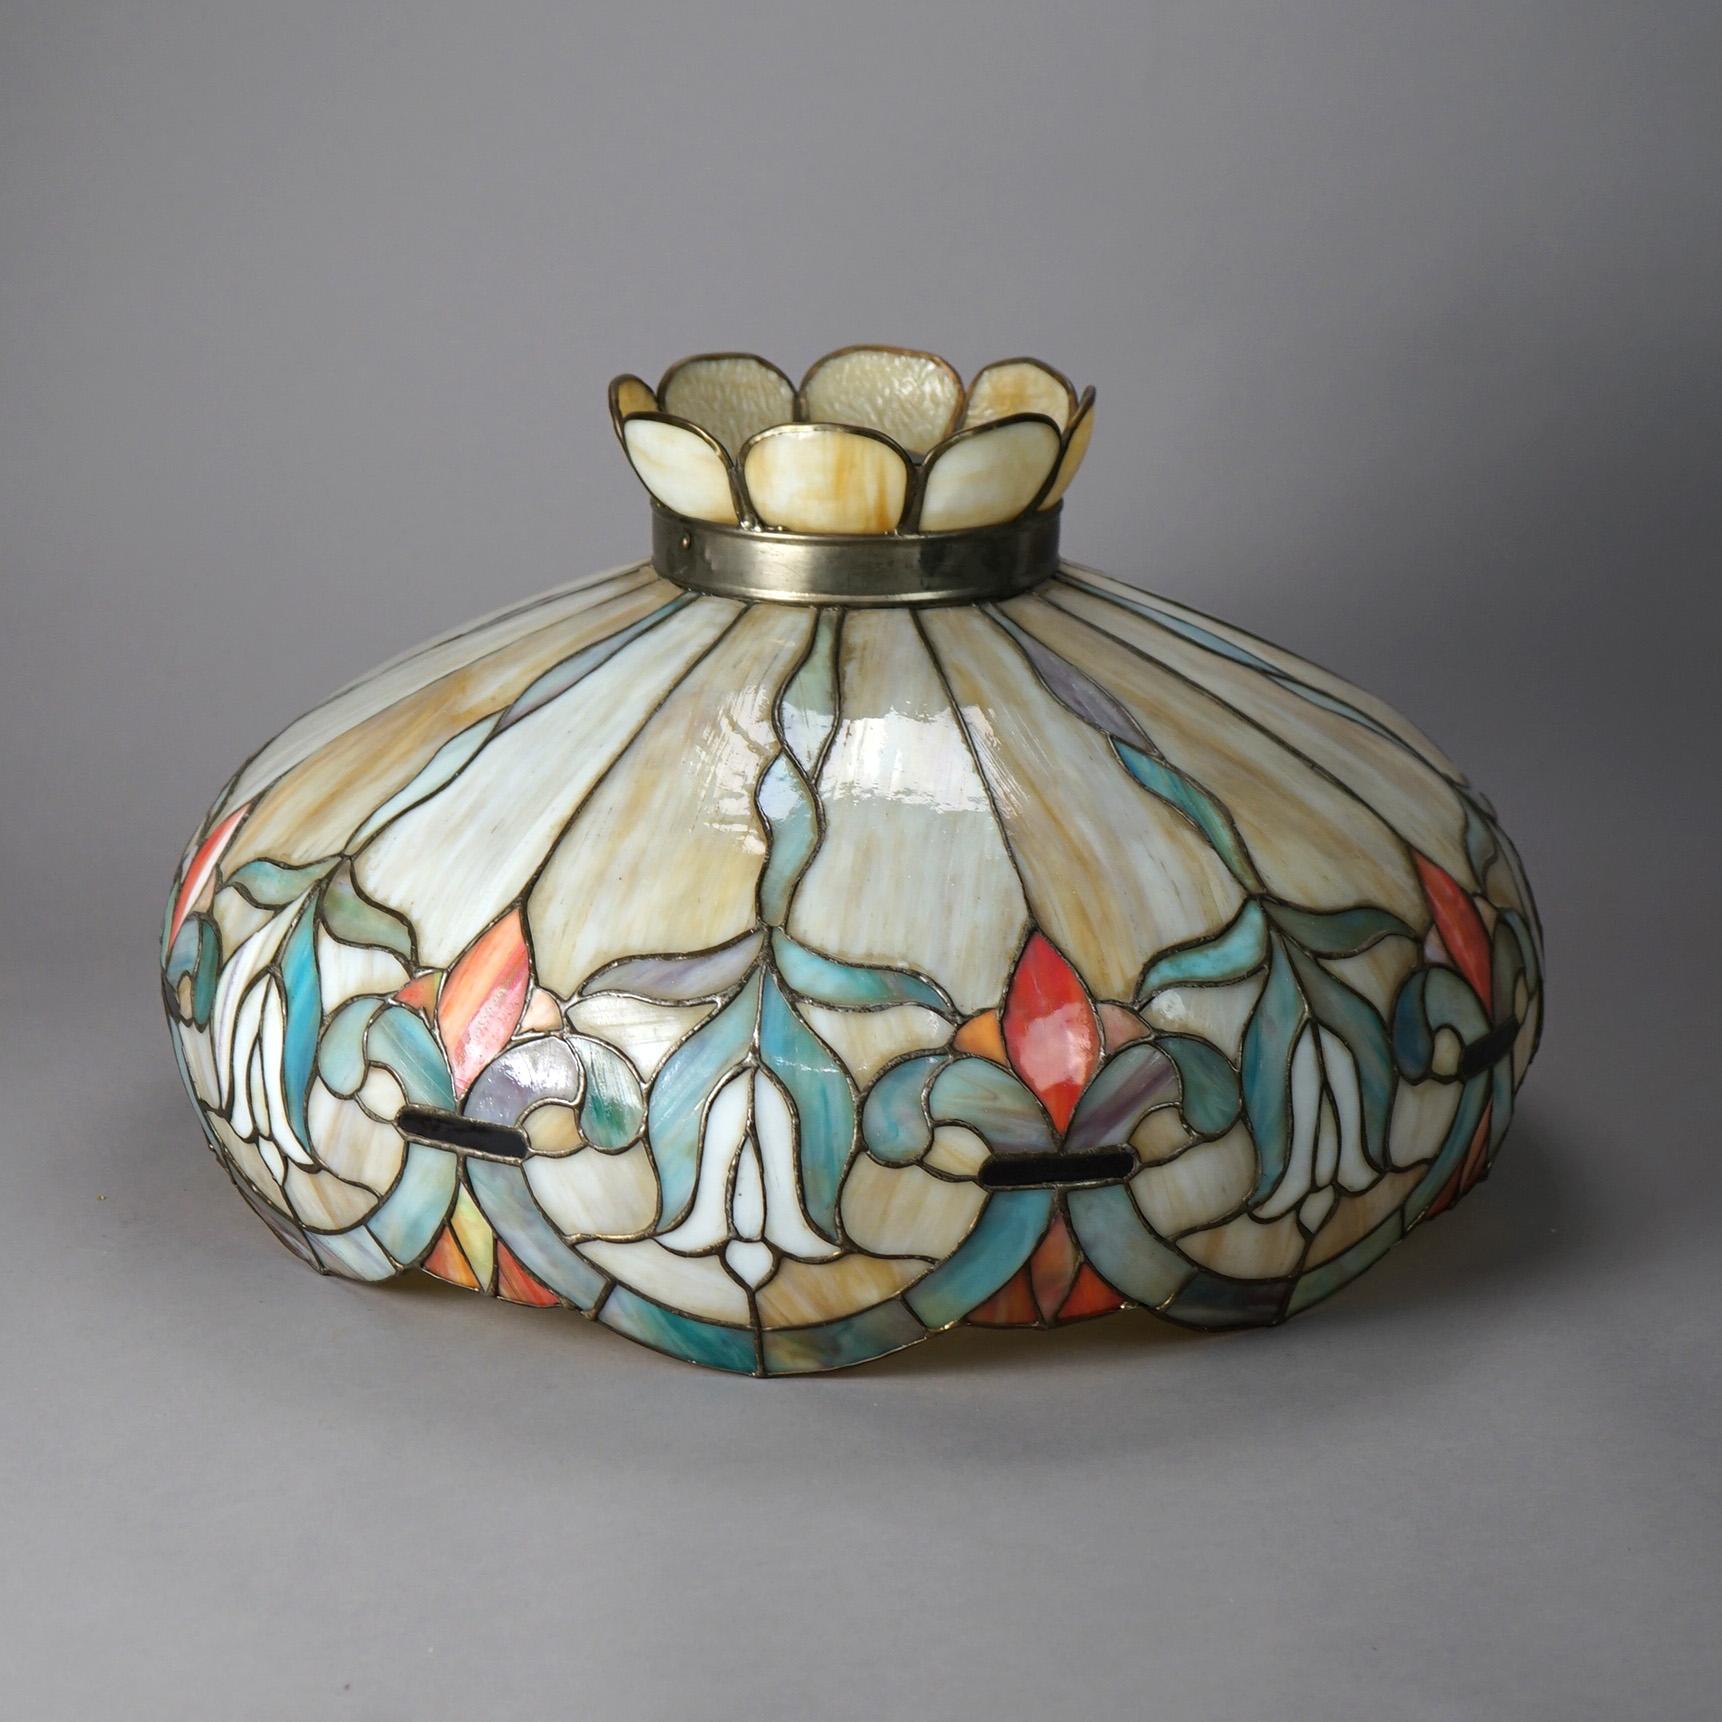 An antique Arts and Crafts shade offers leaded slag glass in dome form with stylized flowers, circa 1910

Measures - 14.5